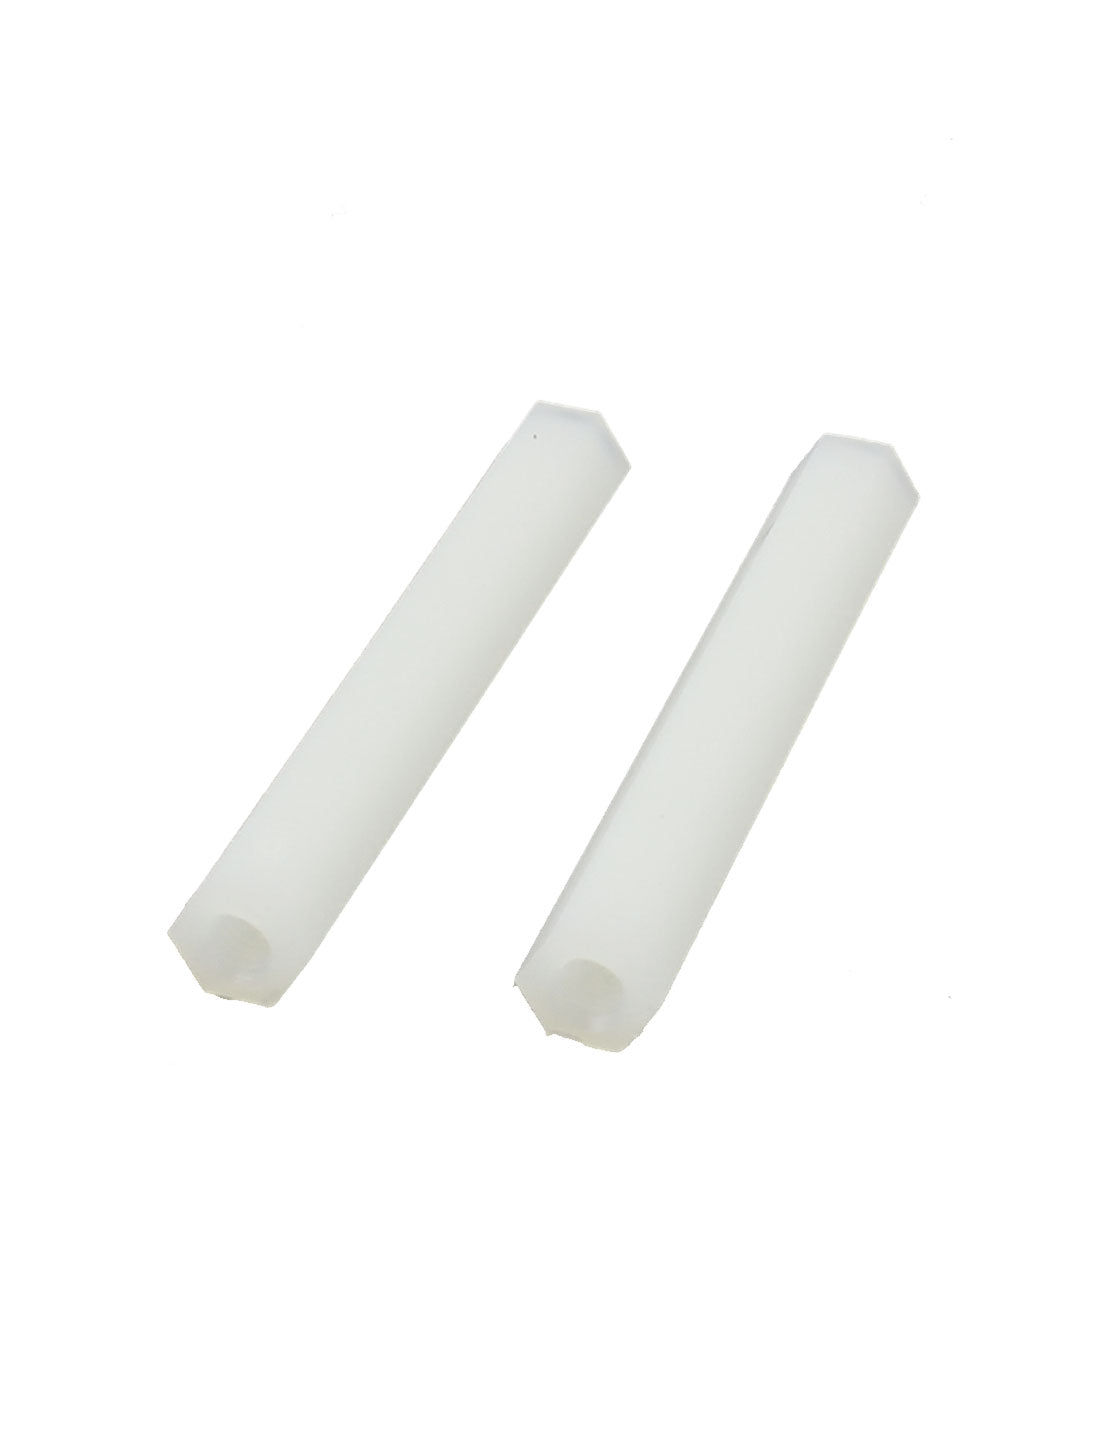 uxcell Uxcell 40mm M3 Female Thread White Nylon PCB Spacer Hex Stand-Off Pillar 30Pcs